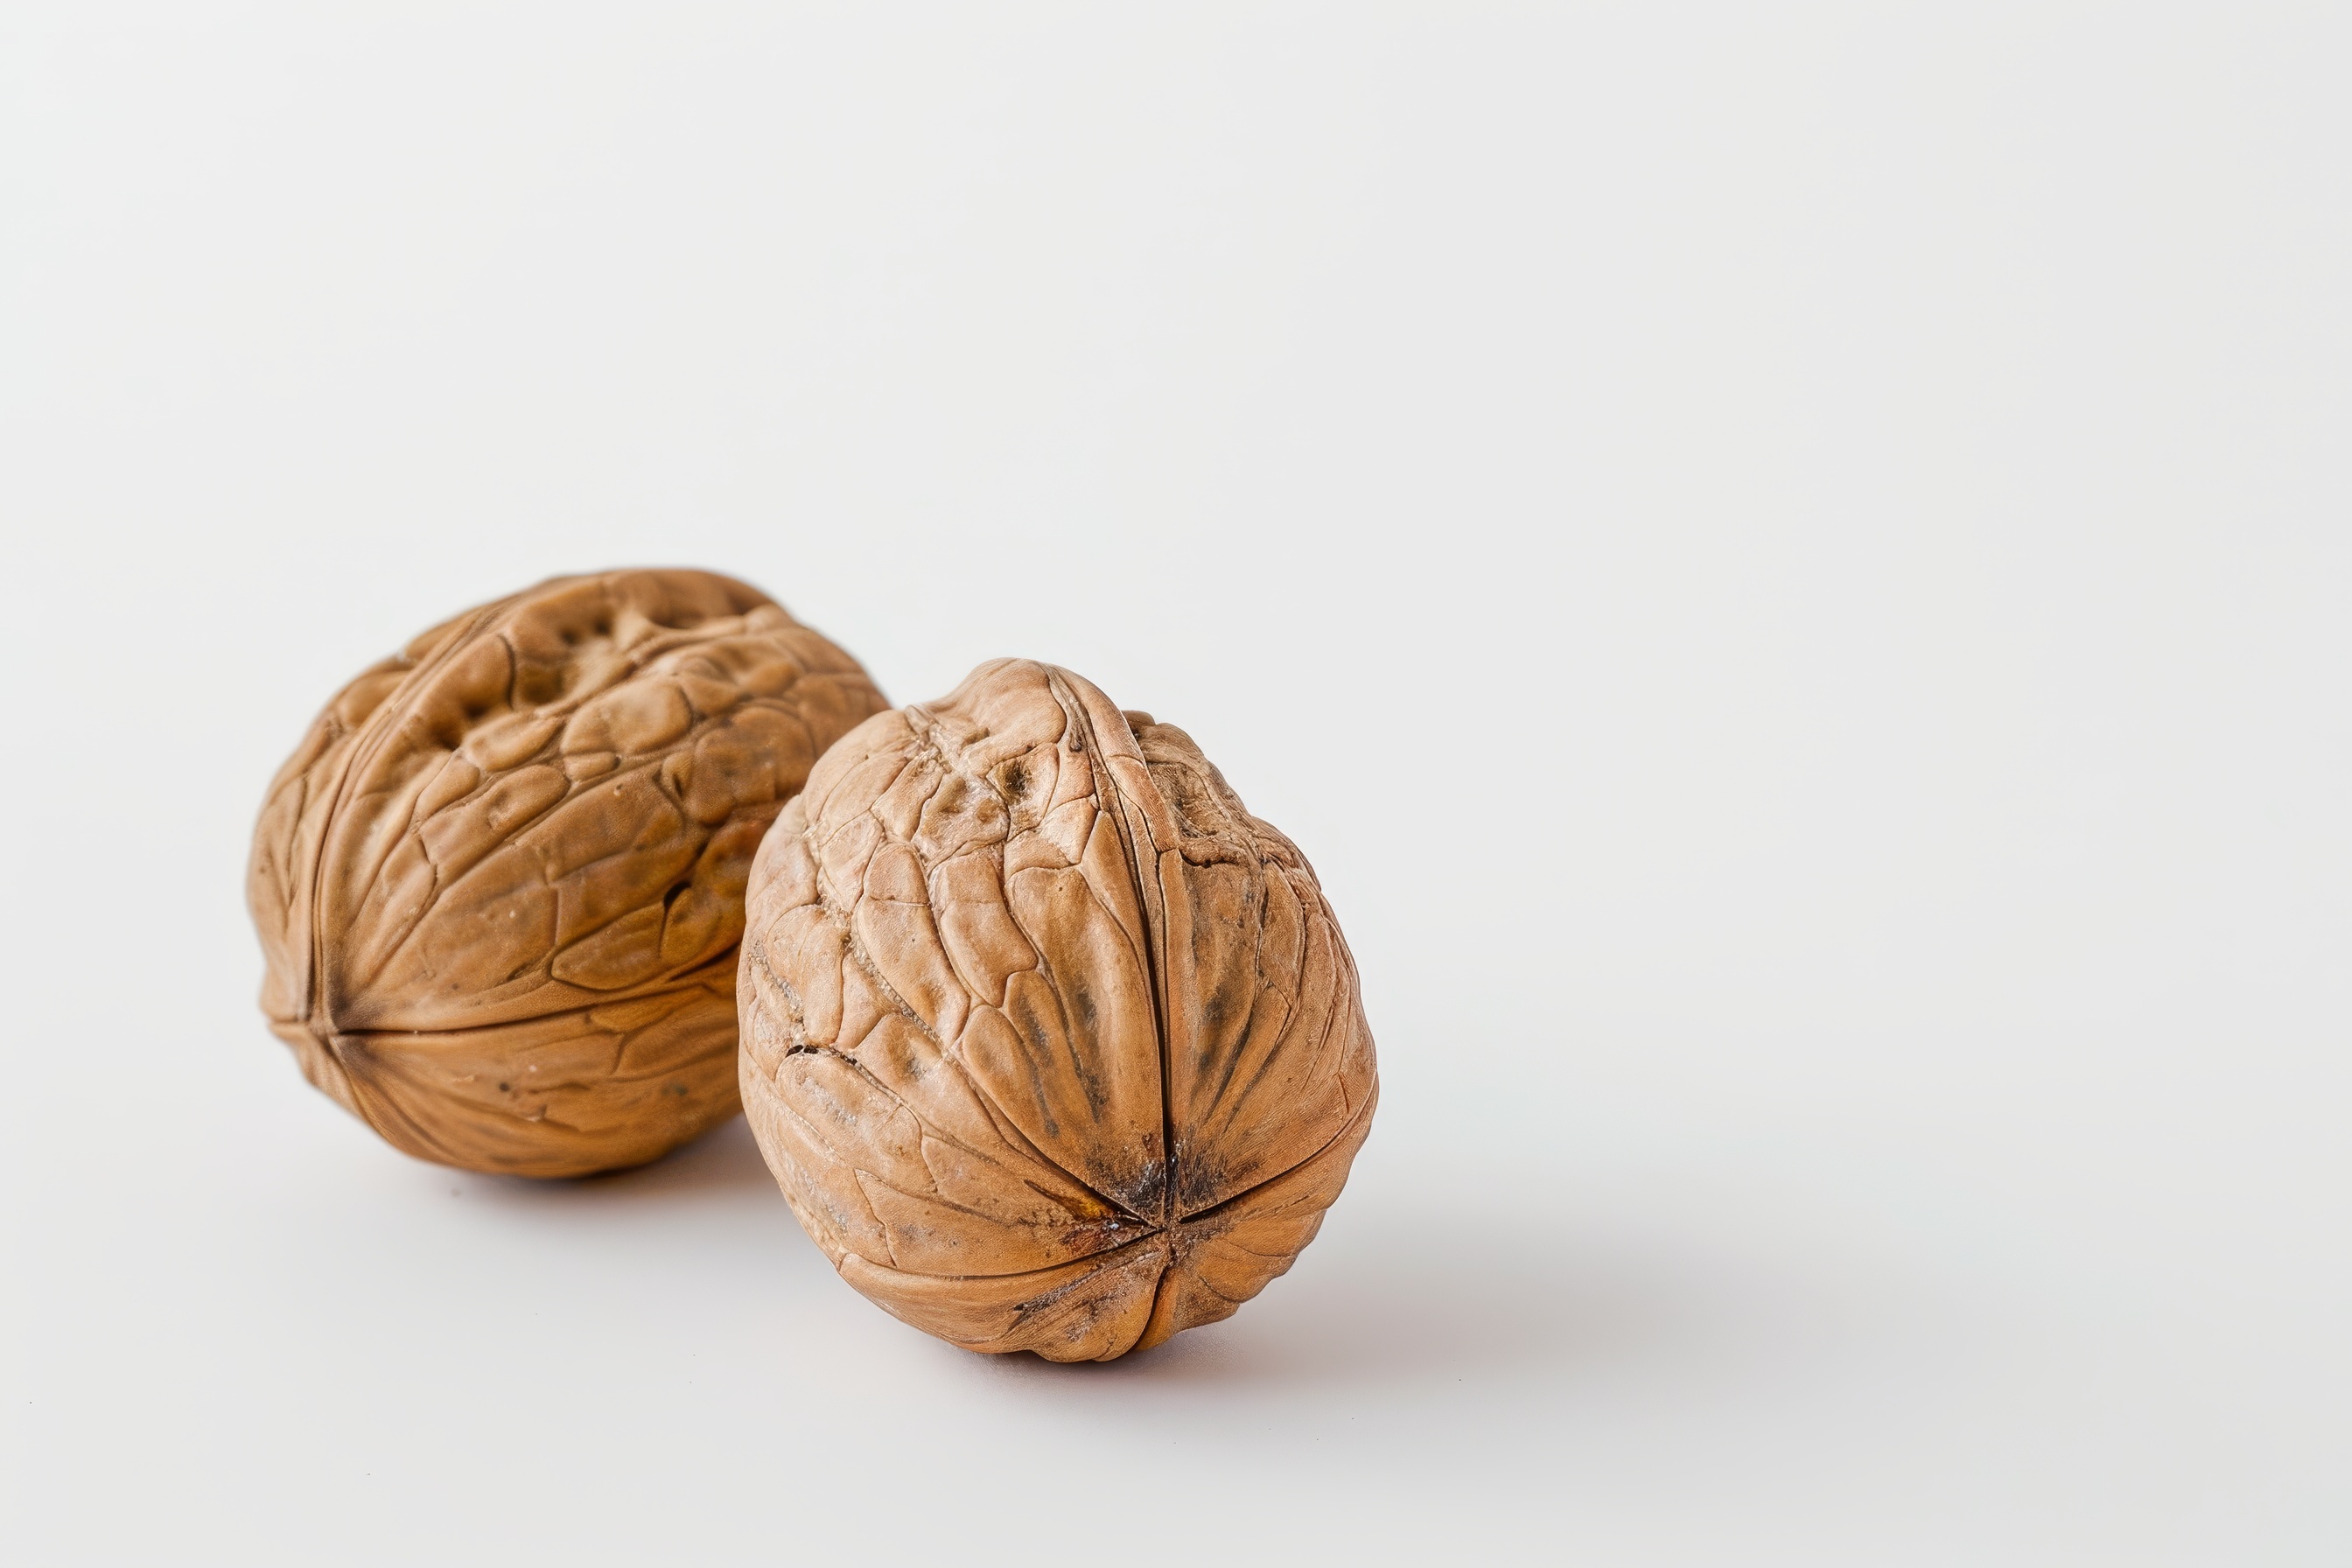 Two walnuts closeup on a white background